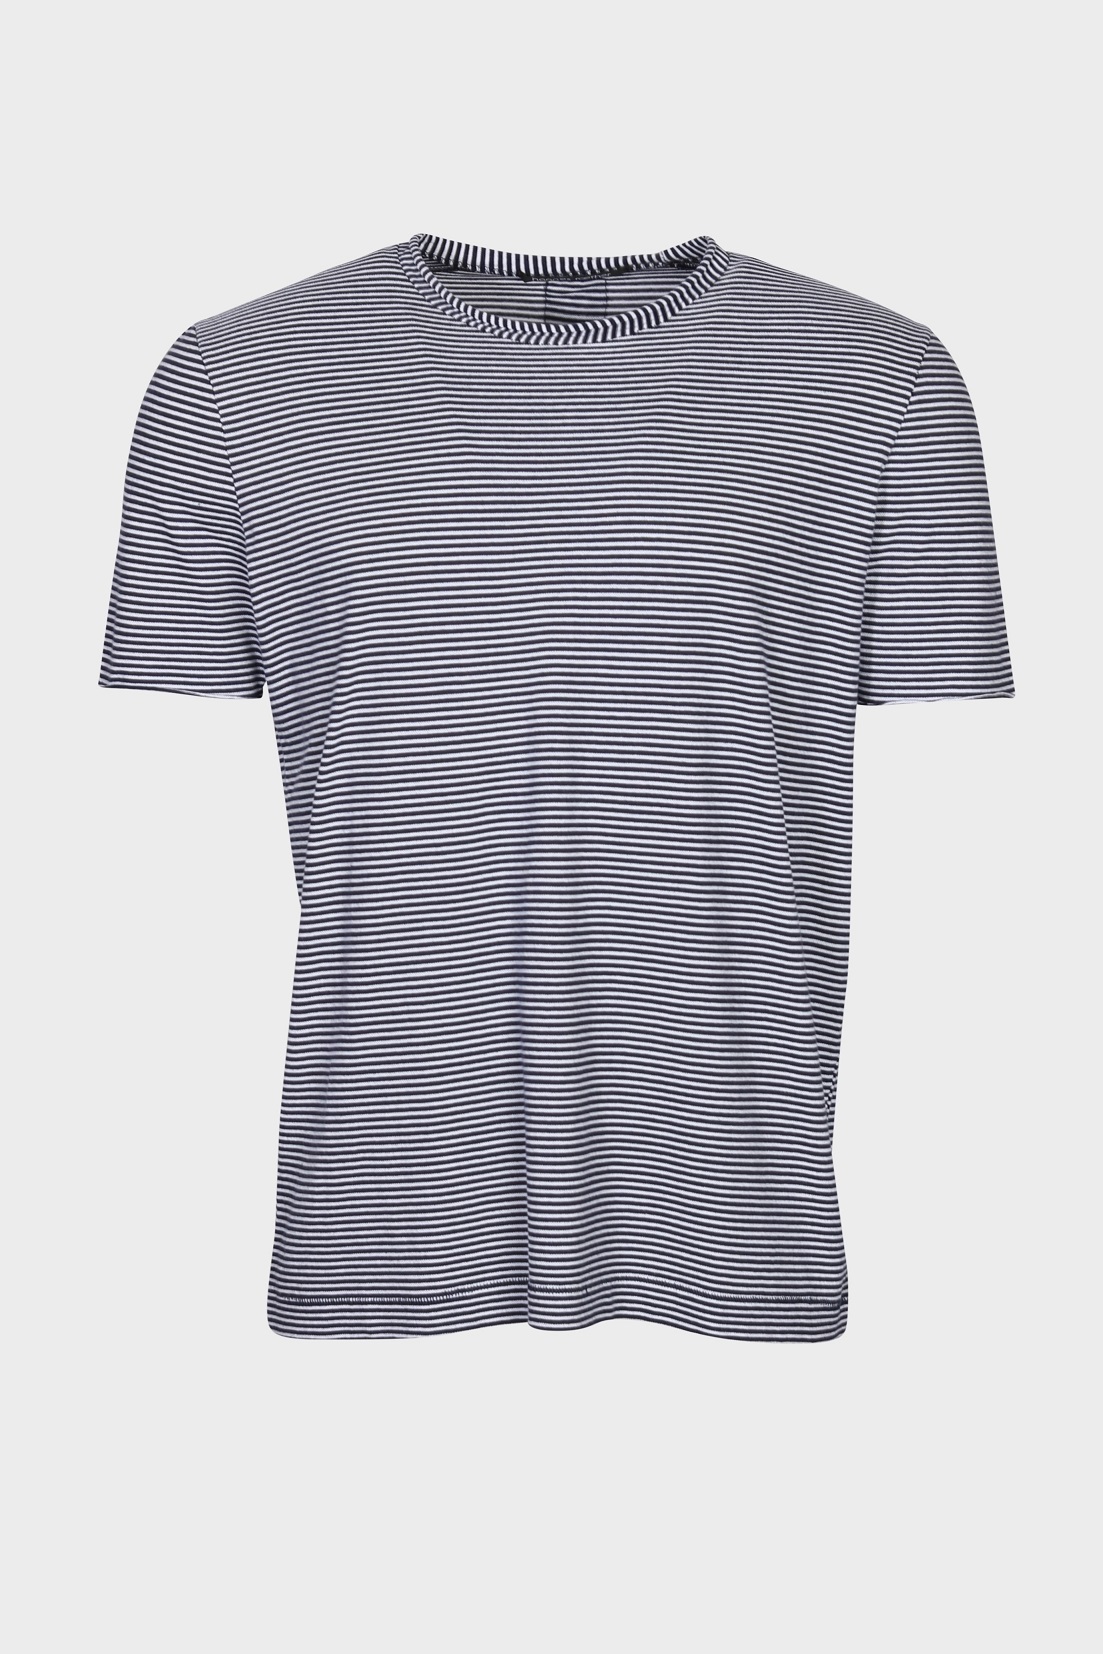 HANNES ROETHER T-Shirt in Navy/White Stripes